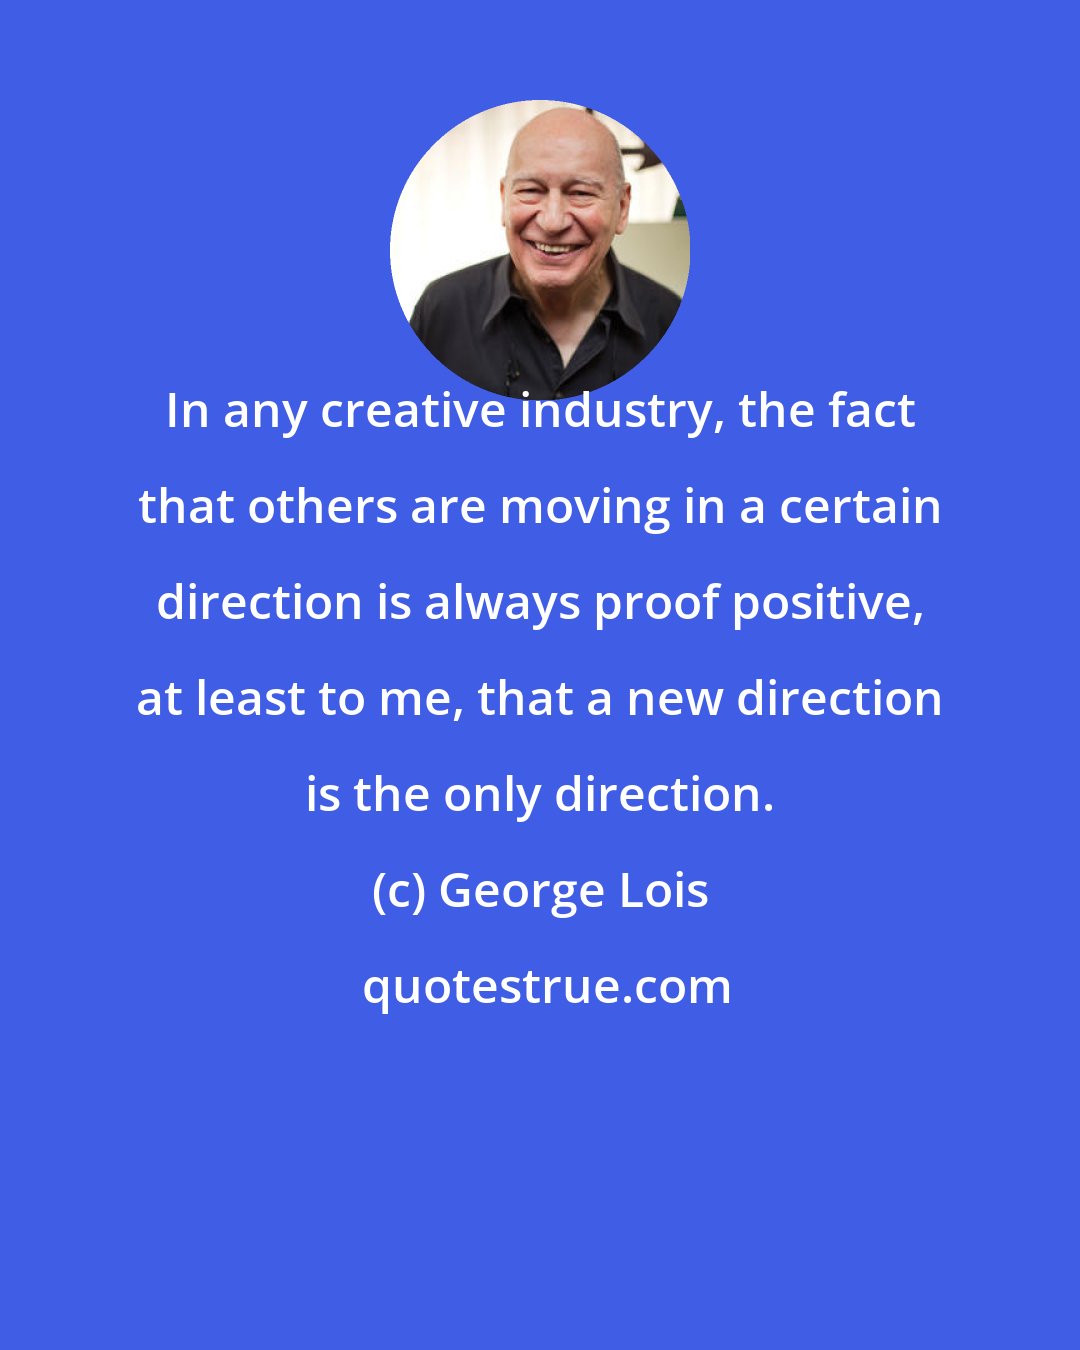 George Lois: In any creative industry, the fact that others are moving in a certain direction is always proof positive, at least to me, that a new direction is the only direction.